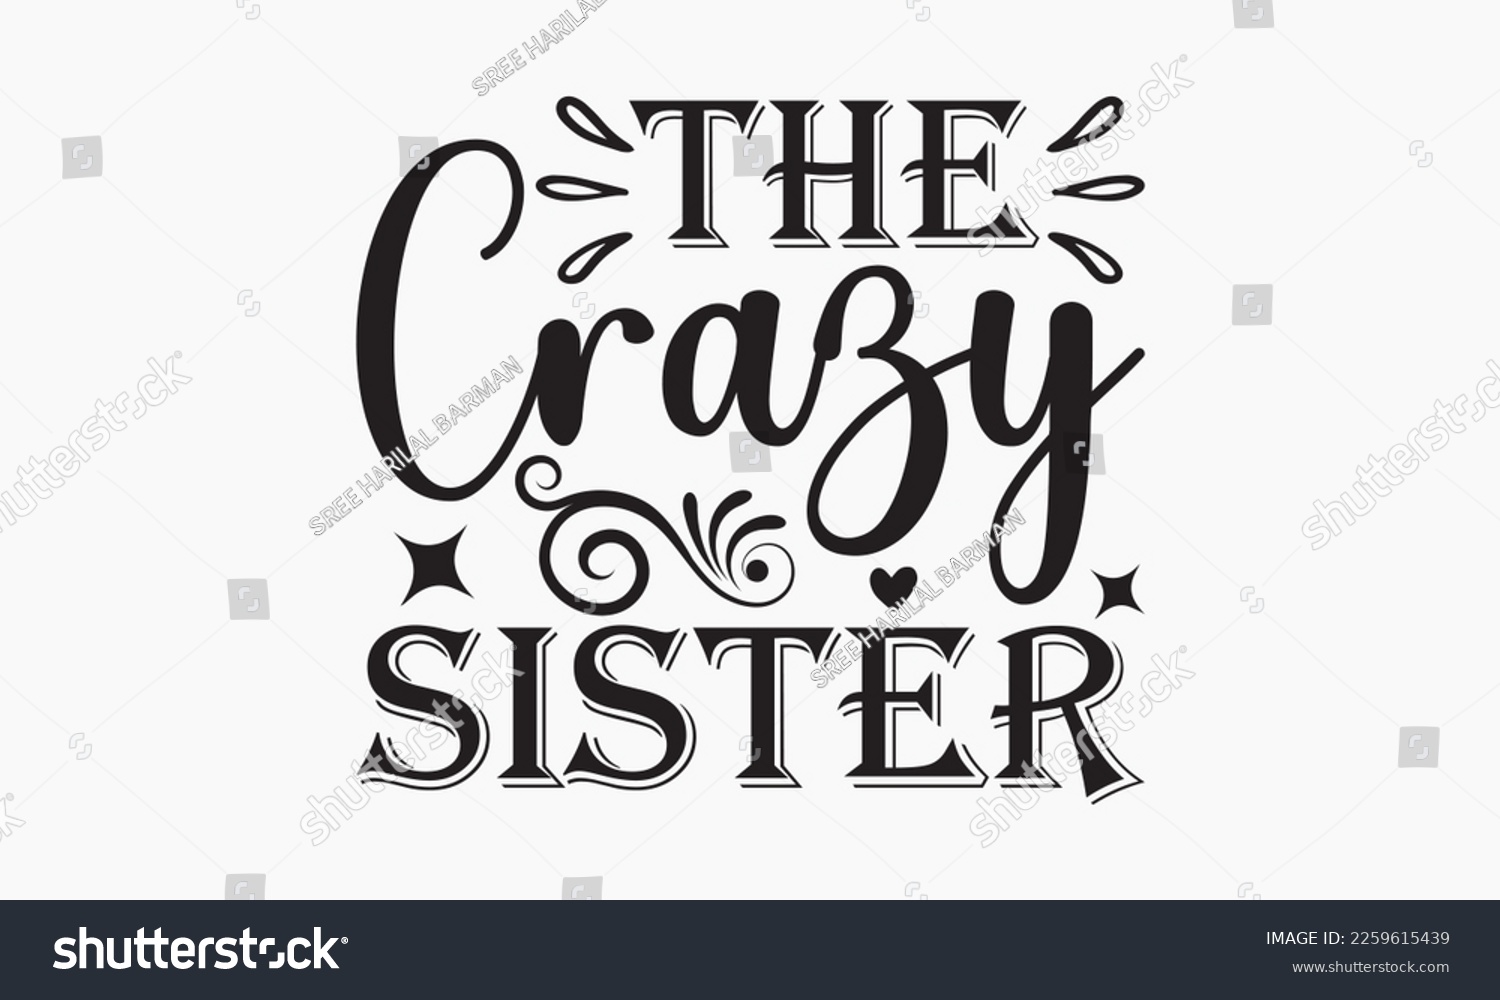 SVG of The crazy sister - Sibling SVG t-shirt design, Hand drawn lettering phrase, Calligraphy t-shirt design, White background, Handwritten vector, EPS 10 svg